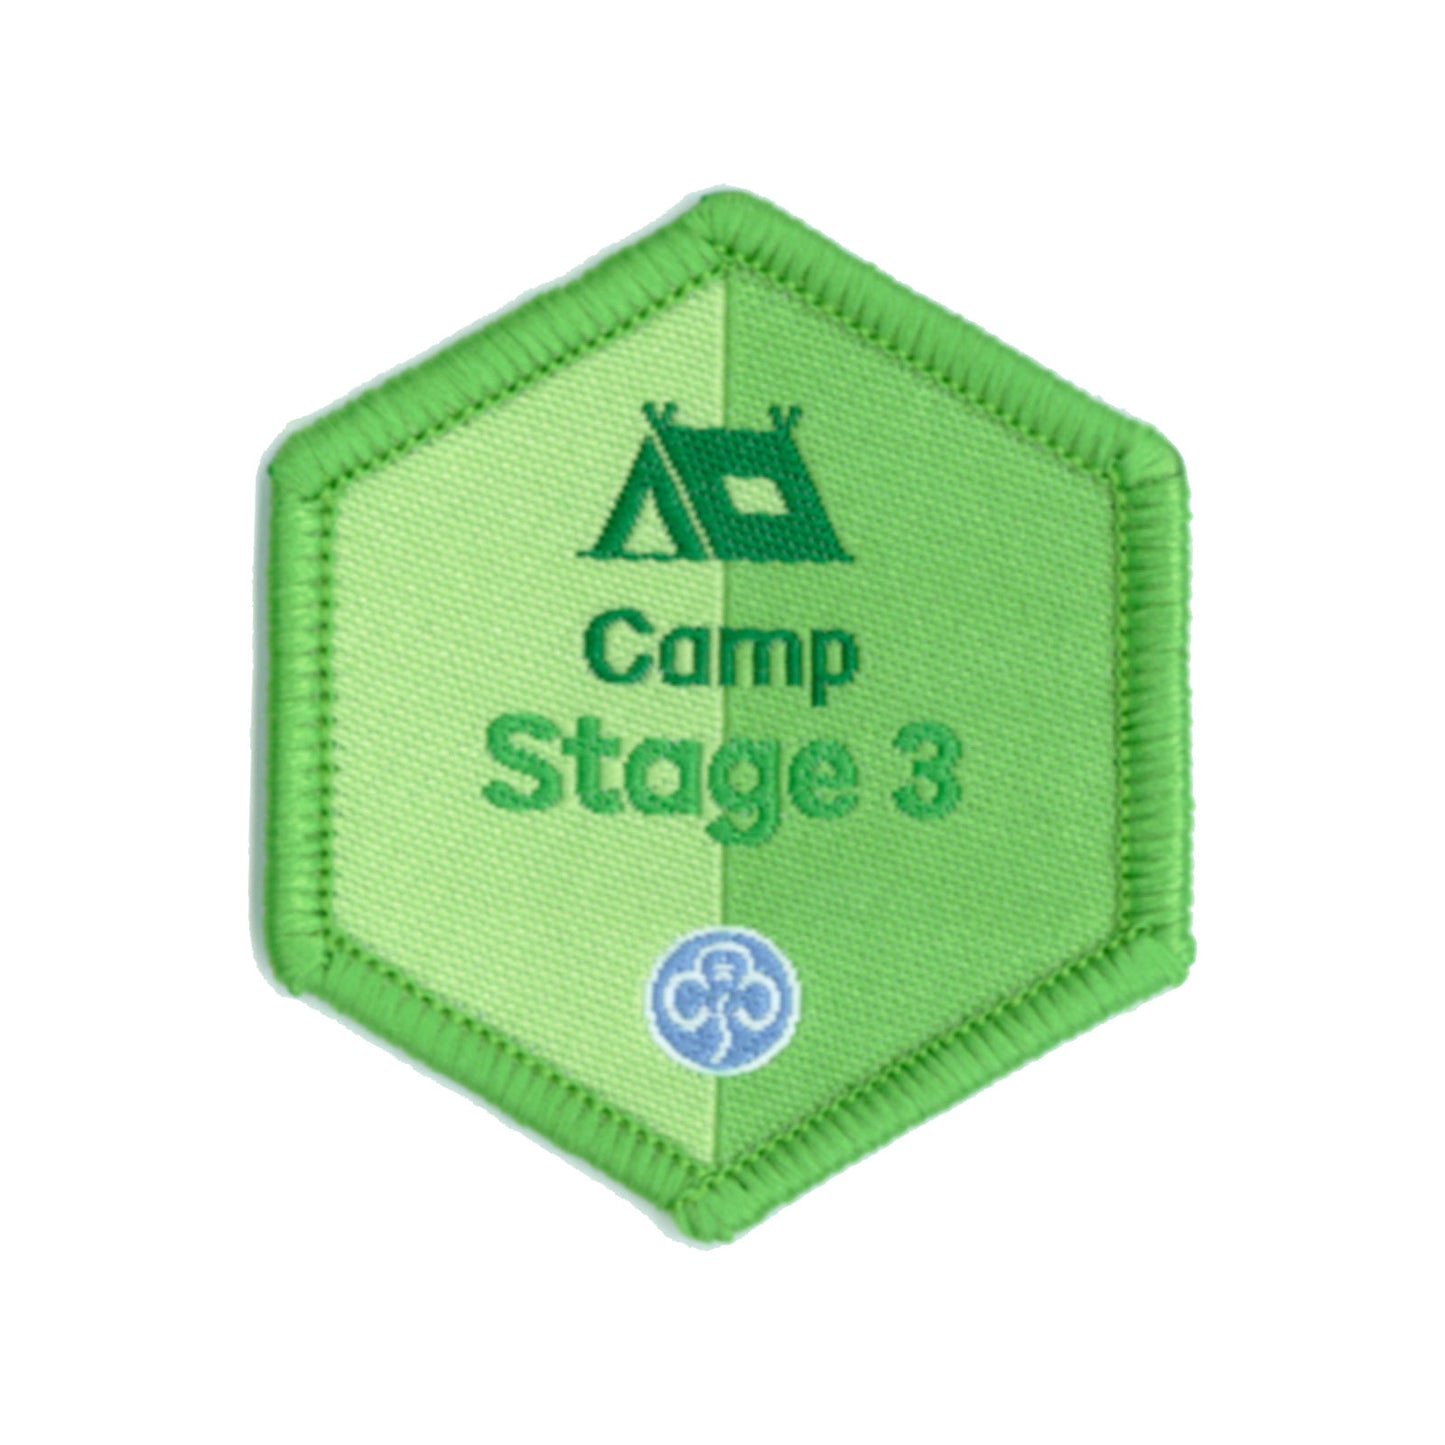 Skills Builder - Have Adventures - Camp Stage 3 Woven Badge